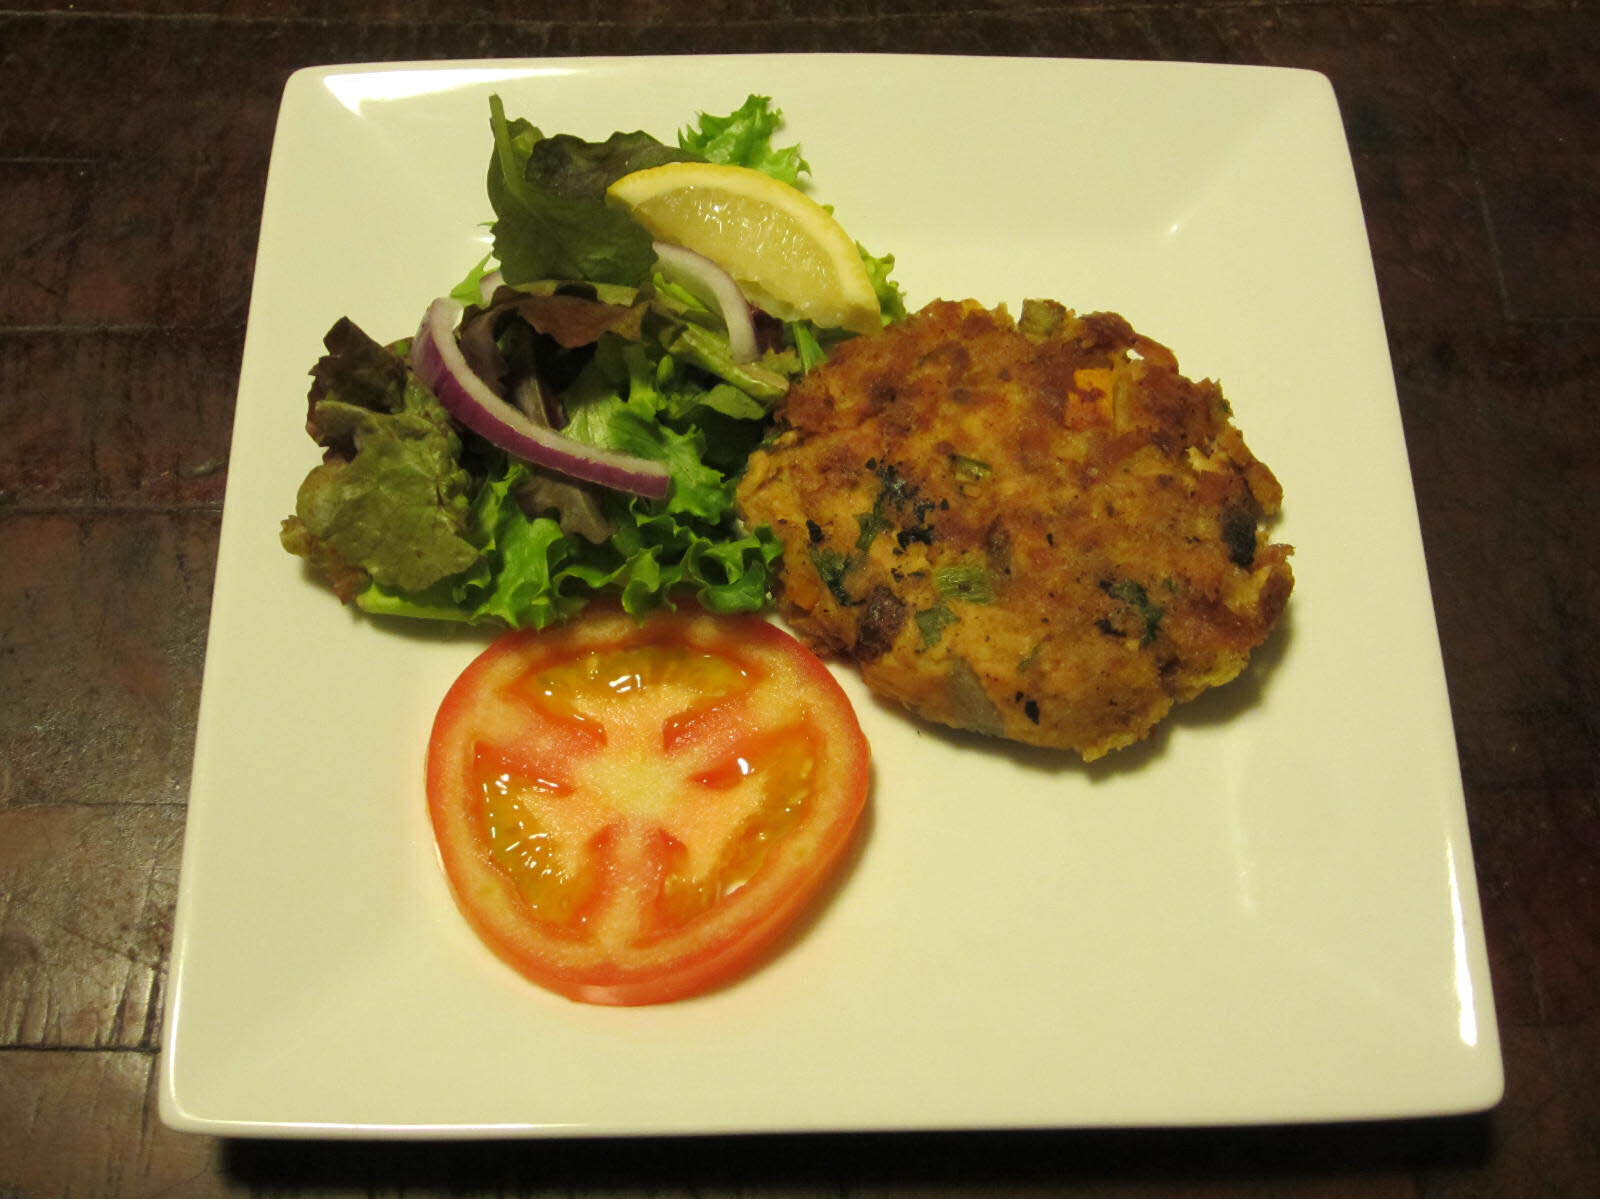 Tuna vegetable burger with tomato and lettuce